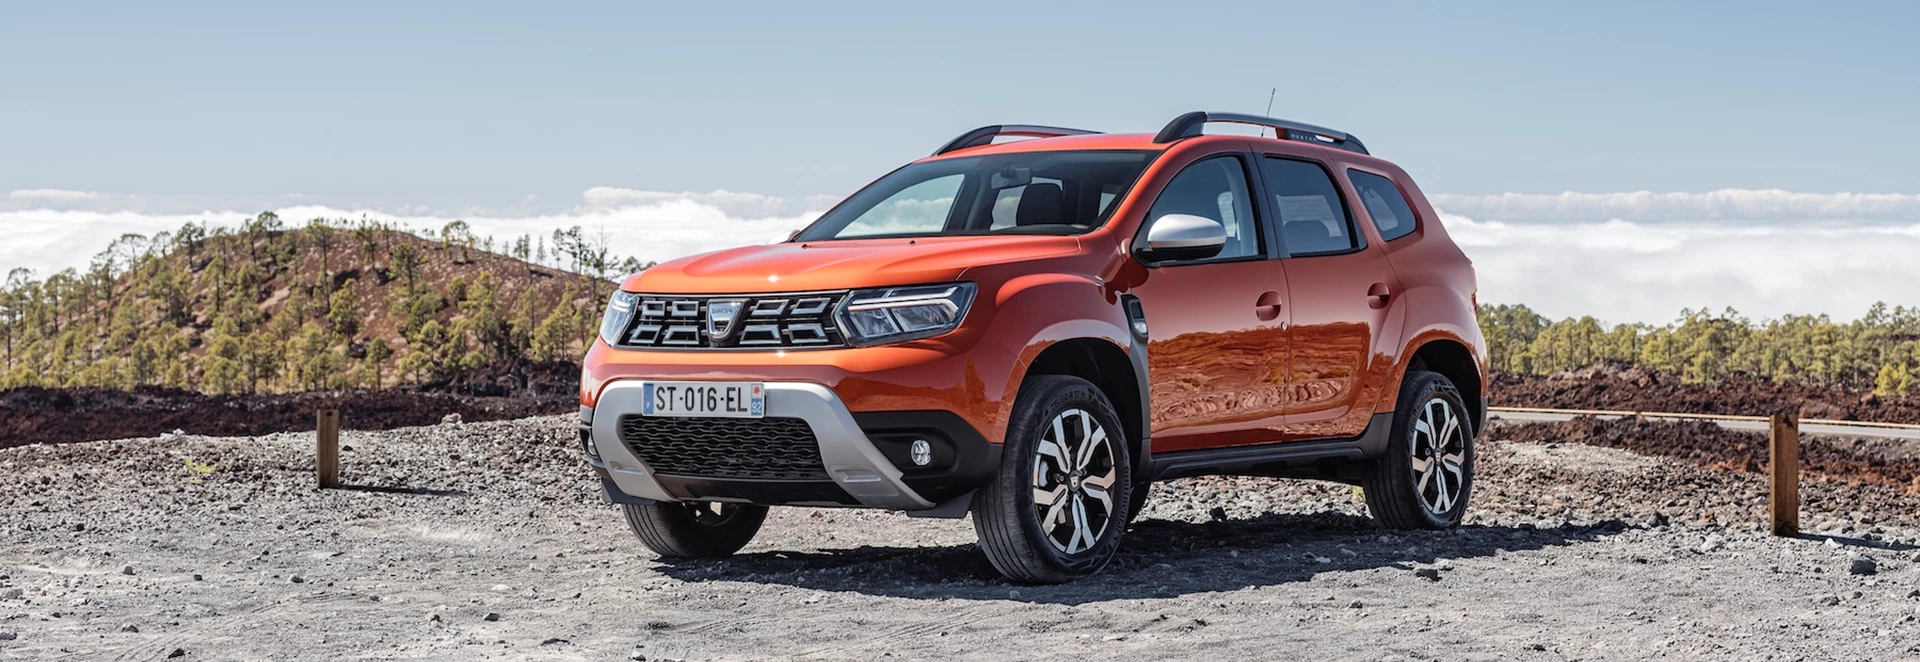 Revised Dacia Duster revealed with more technology and new look 